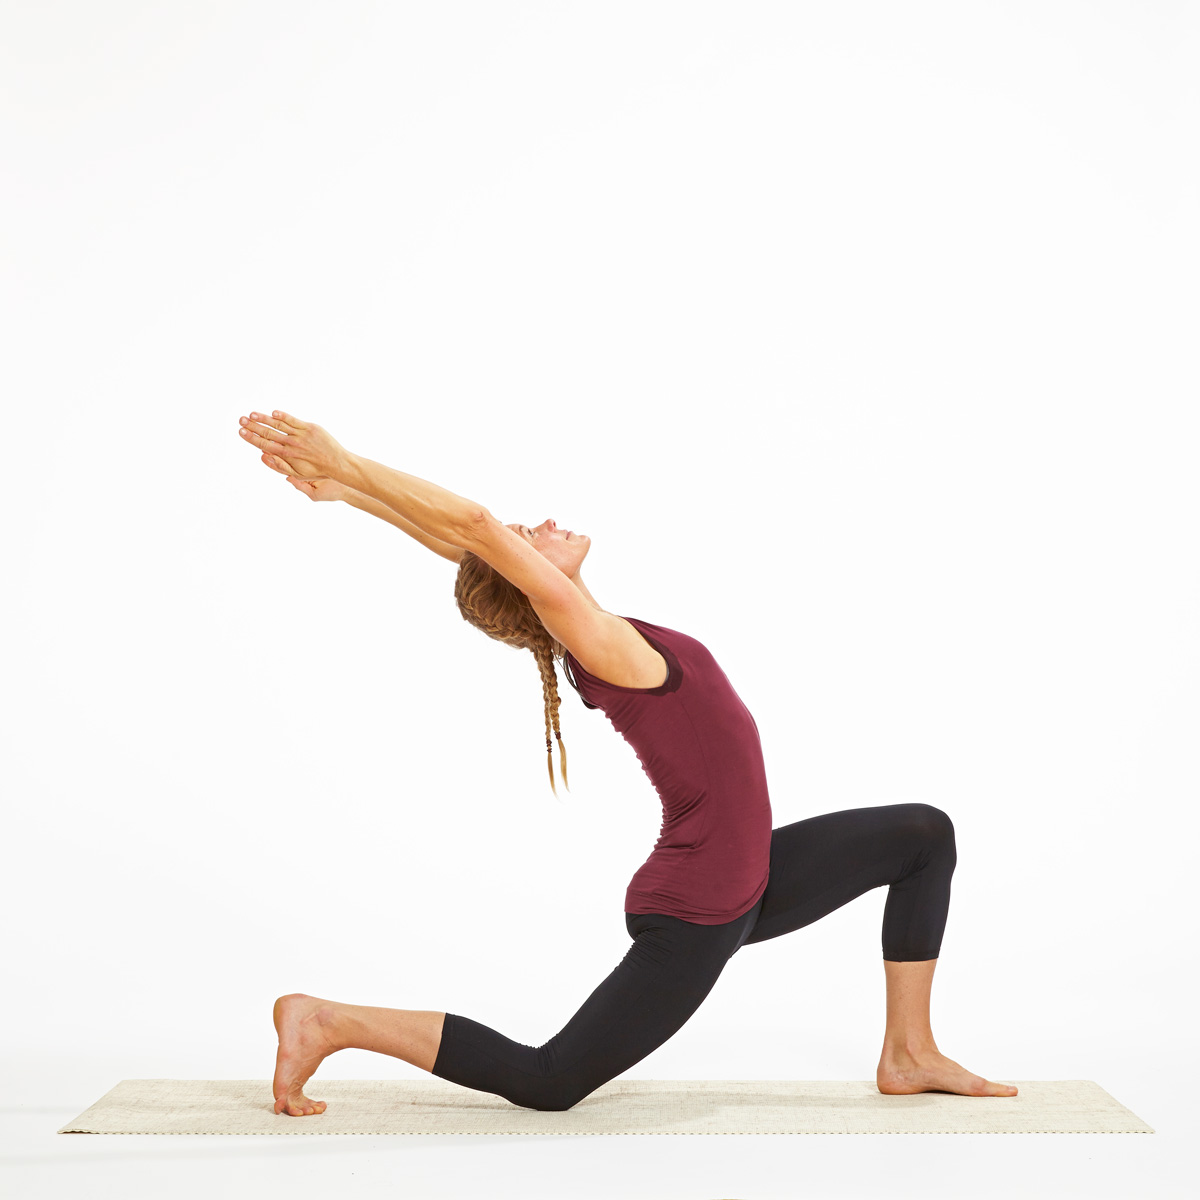 Bow Pose Yoga Guide For Everyone - Yoga Poses 4 You